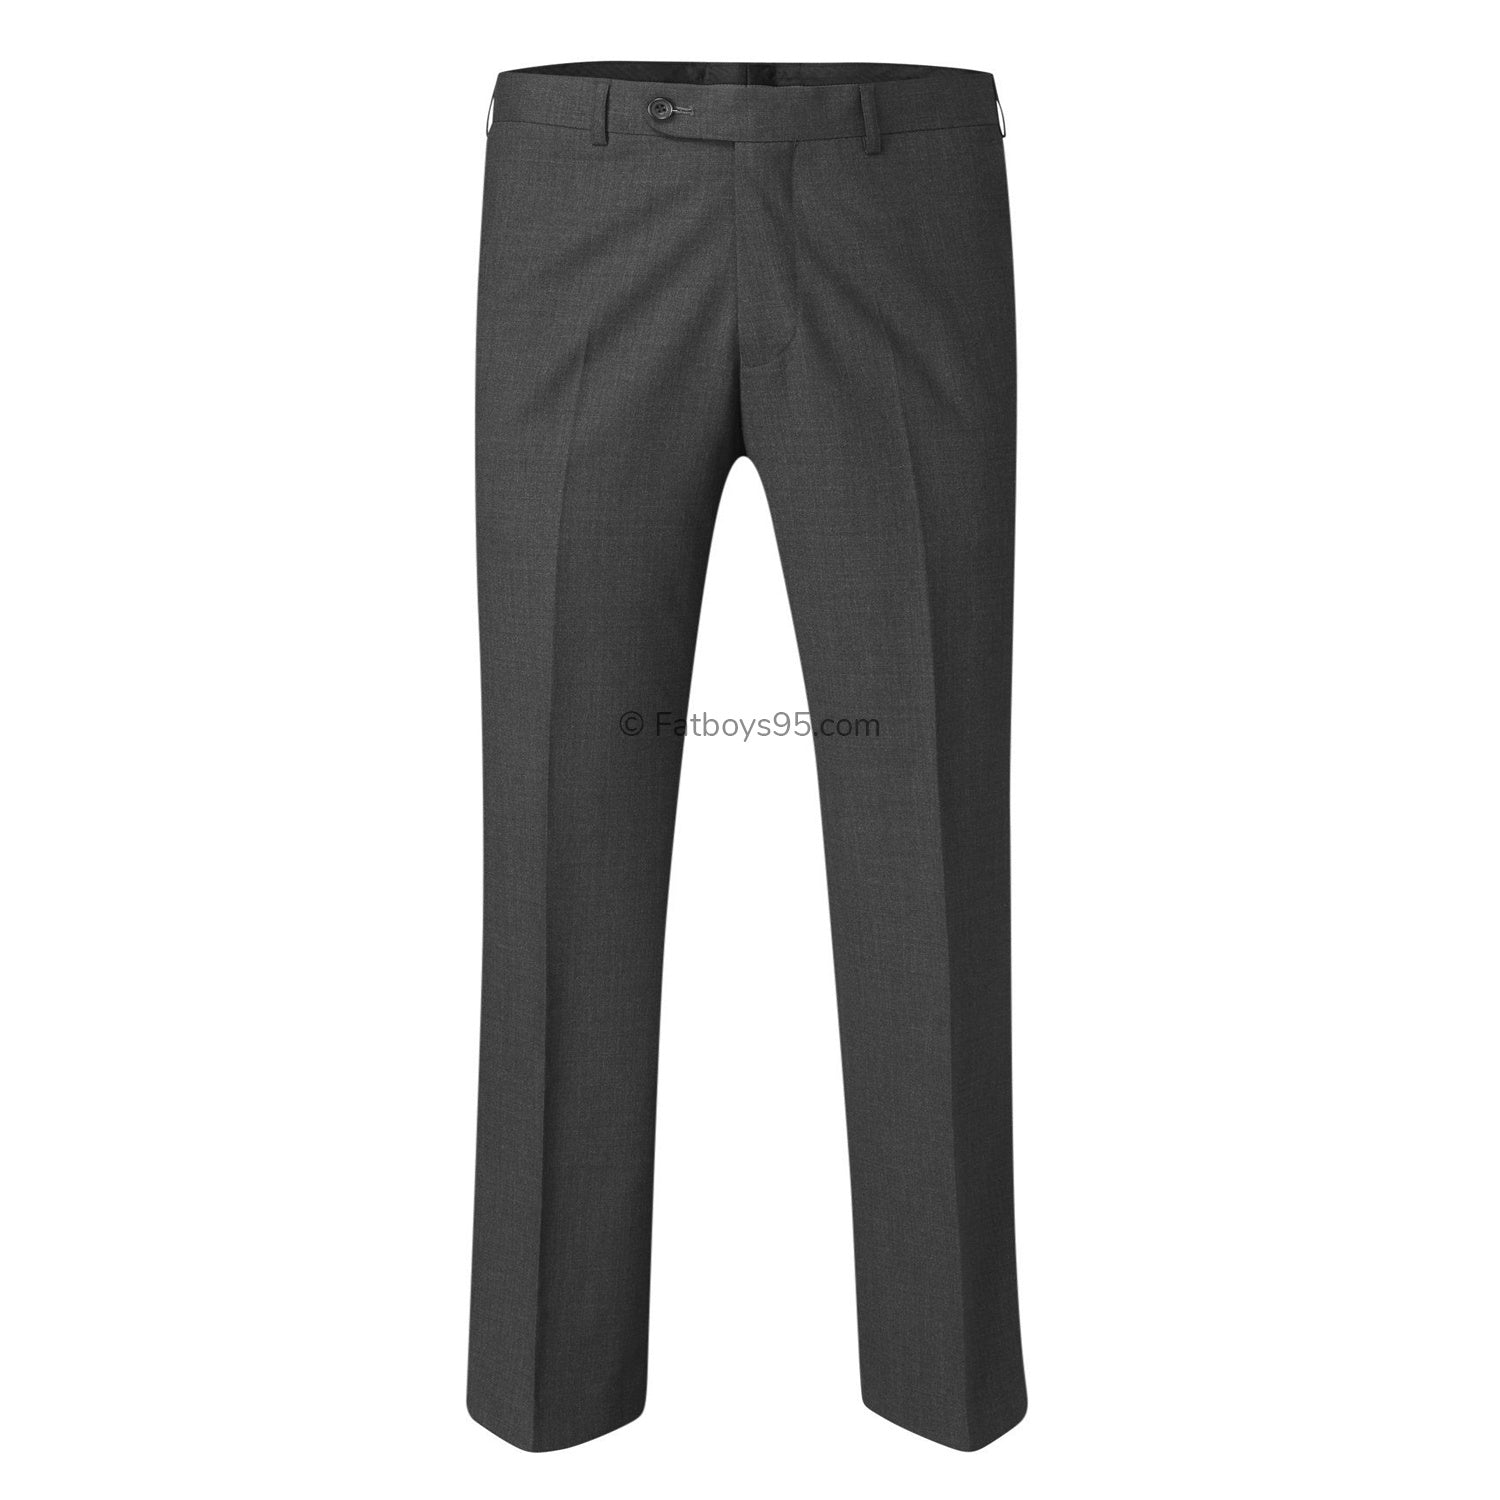 Skopes Suit Trousers - Darwin - MM7831 - Charcoal 1